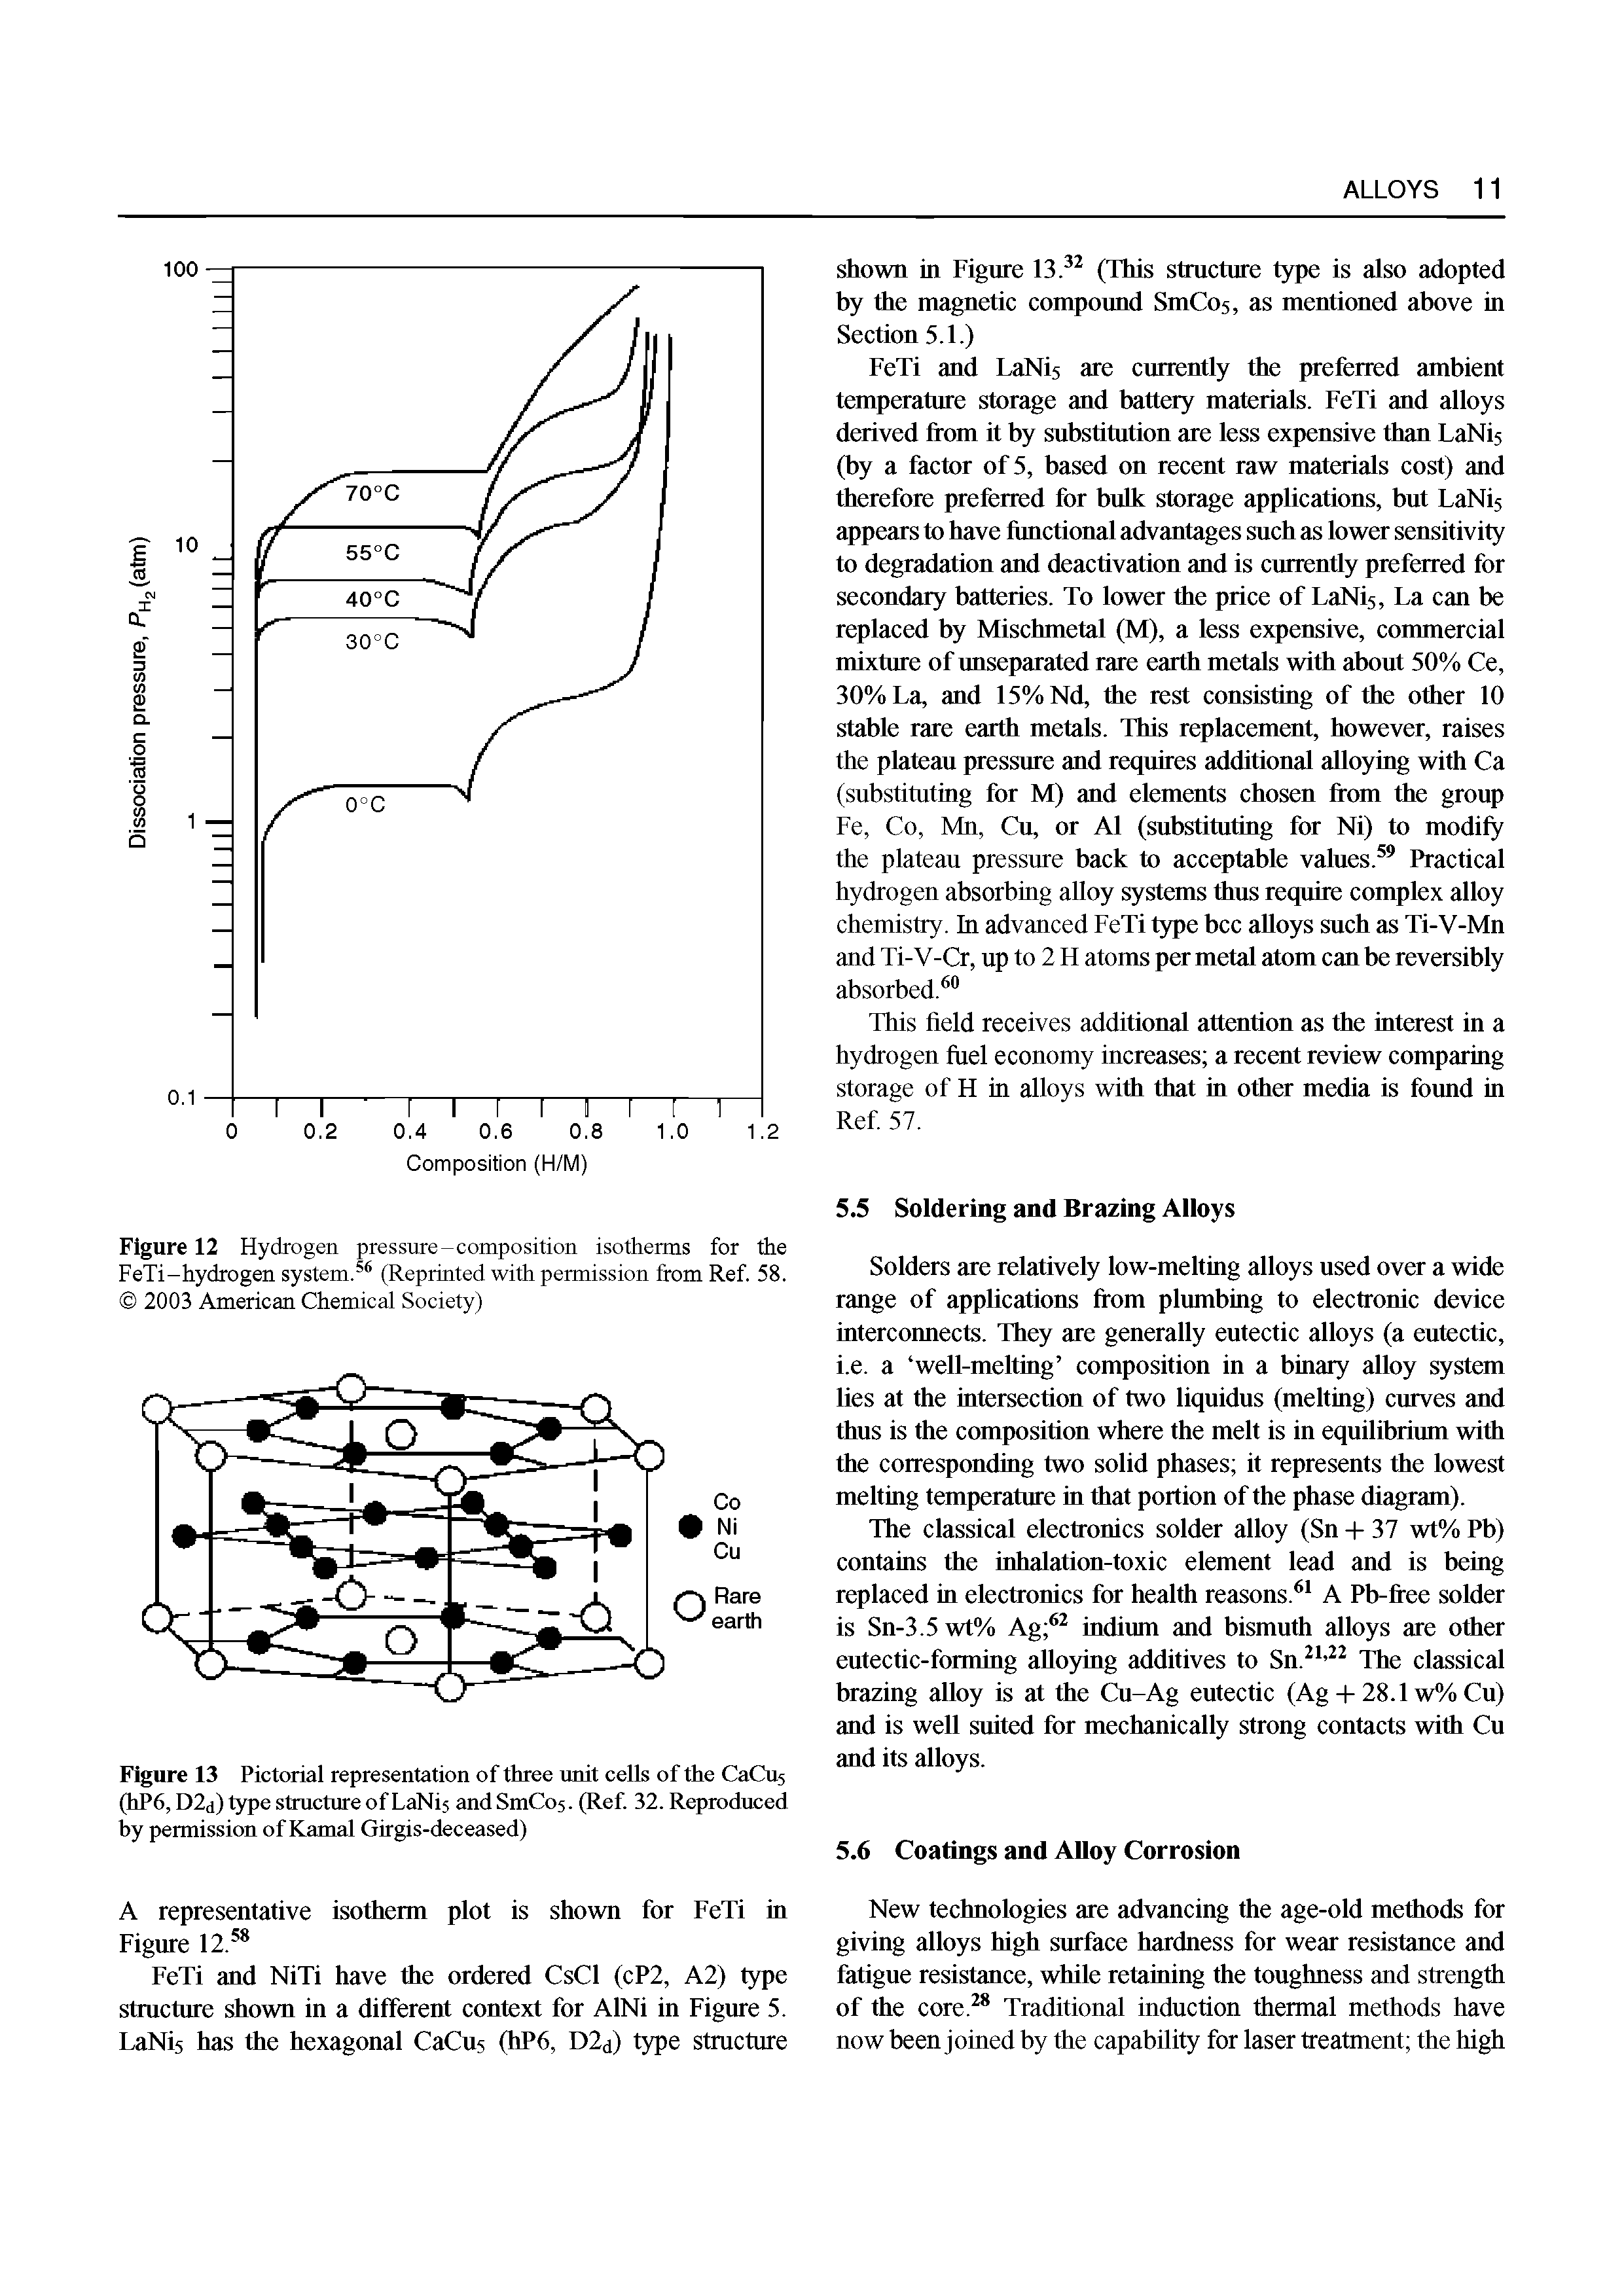 Figure 12 Hydrogen pressure-composition isotherms for the FeTi-hydrogen system. (Reprinted with permission from Ref. 58. 2003 American Chemical Society)...